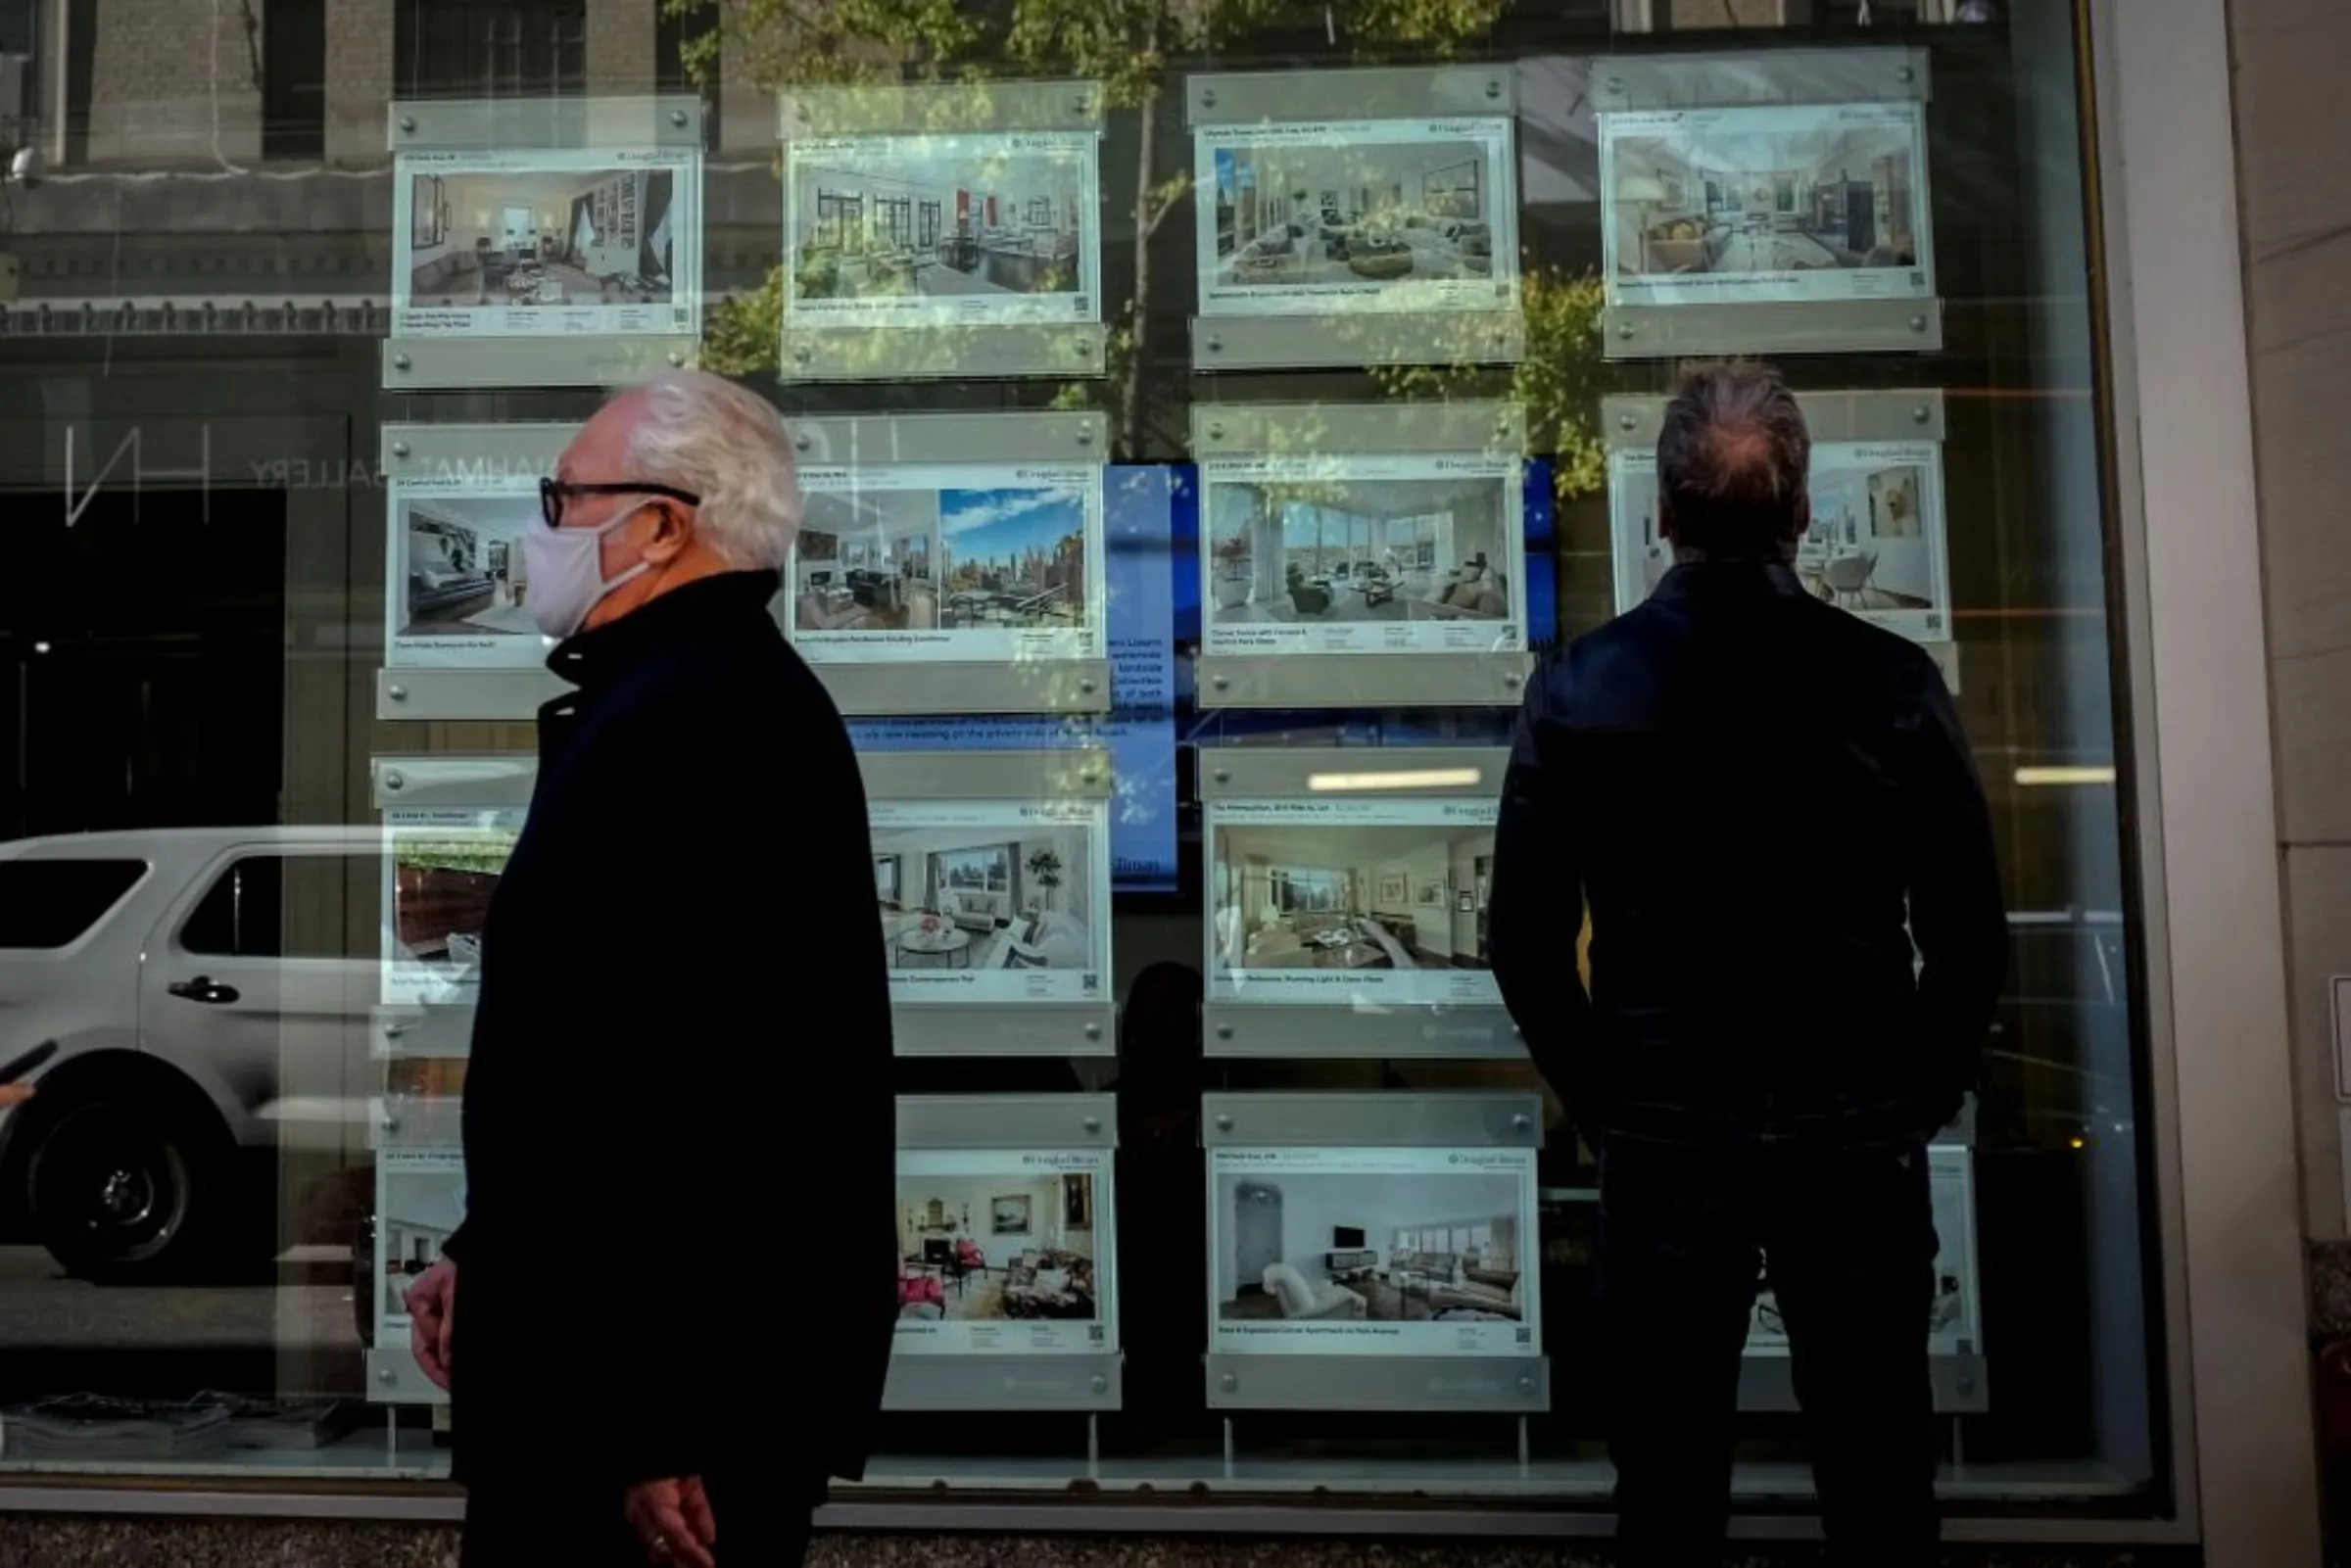 A man looks at advertisements for luxury apartments and homes in the window of Real Estate sales business in Manhattan's upper east side neighborhood in New York City, New York, U.S. October 19, 2021